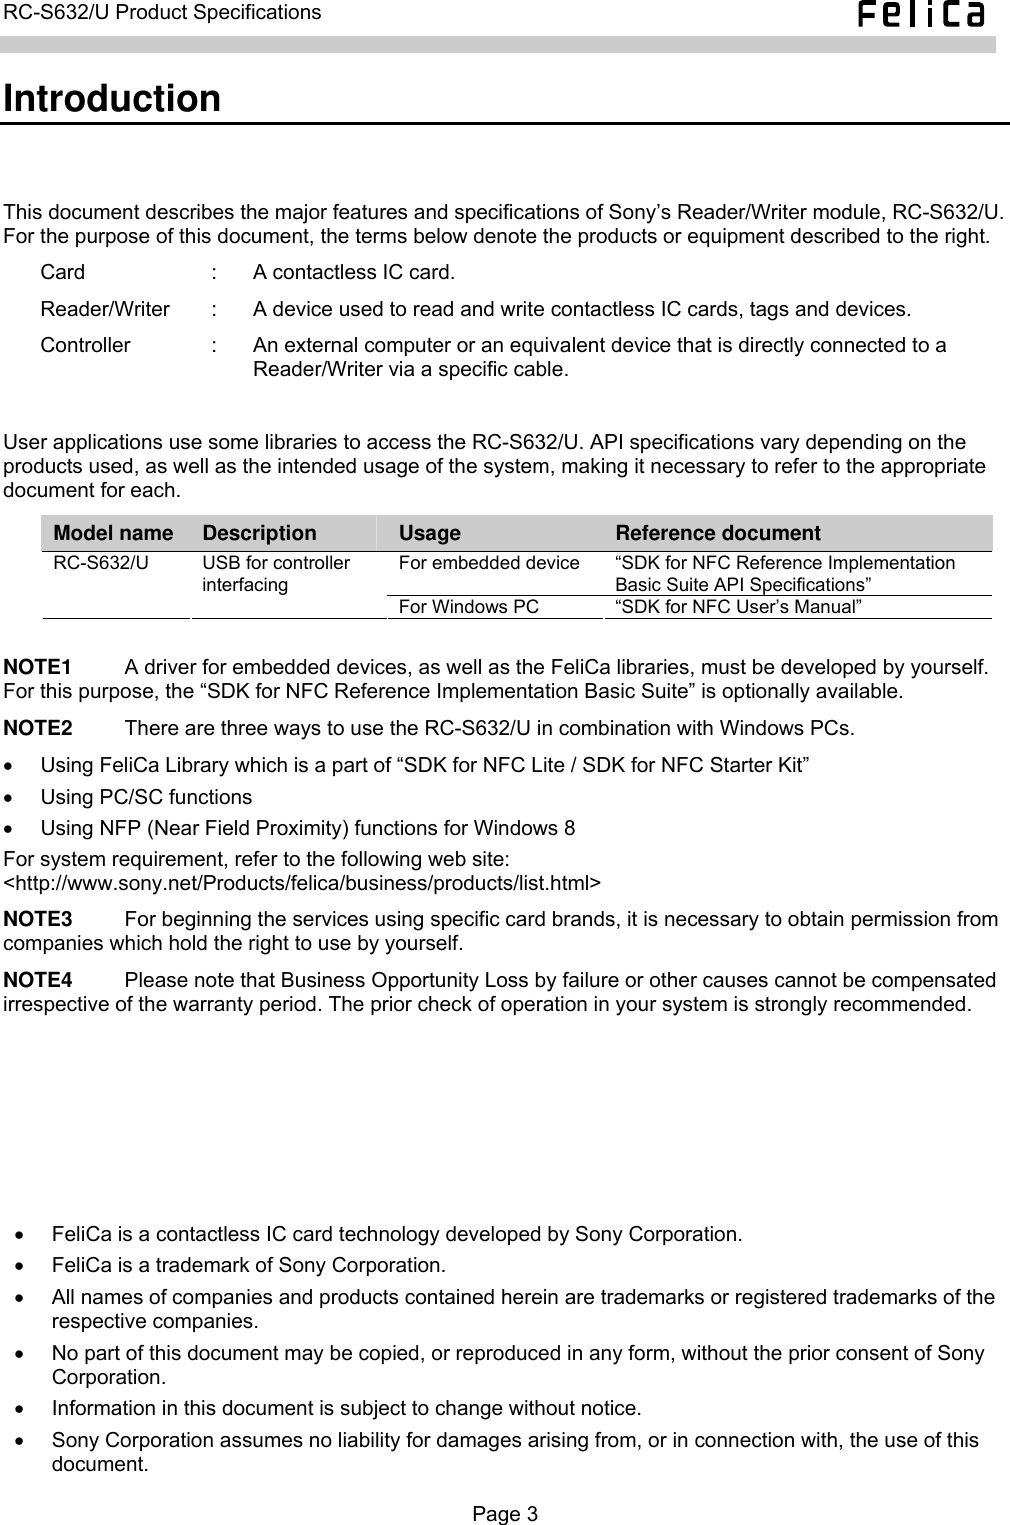   RC-S632/U Product Specifications  Introduction This document describes the major features and specifications of Sony’s Reader/Writer module, RC-S632/U. For the purpose of this document, the terms below denote the products or equipment described to the right. Card  :  A contactless IC card. Reader/Writer  :  A device used to read and write contactless IC cards, tags and devices. Controller  :  An external computer or an equivalent device that is directly connected to a Reader/Writer via a specific cable.  User applications use some libraries to access the RC-S632/U. API specifications vary depending on the products used, as well as the intended usage of the system, making it necessary to refer to the appropriate document for each. Model name  Description  Usage  Reference document For embedded device  “SDK for NFC Reference Implementation Basic Suite API Specifications” RC-S632/U  USB for controller interfacing For Windows PC  “SDK for NFC User’s Manual”  NOTE1          A driver for embedded devices, as well as the FeliCa libraries, must be developed by yourself. For this purpose, the “SDK for NFC Reference Implementation Basic Suite” is optionally available. NOTE2          There are three ways to use the RC-S632/U in combination with Windows PCs. •  Using FeliCa Library which is a part of “SDK for NFC Lite / SDK for NFC Starter Kit” •  Using PC/SC functions •  Using NFP (Near Field Proximity) functions for Windows 8 For system requirement, refer to the following web site: &lt;http://www.sony.net/Products/felica/business/products/list.html&gt; NOTE3     For beginning the services using specific card brands, it is necessary to obtain permission from companies which hold the right to use by yourself. NOTE4     Please note that Business Opportunity Loss by failure or other causes cannot be compensated irrespective of the warranty period. The prior check of operation in your system is strongly recommended. •  FeliCa is a contactless IC card technology developed by Sony Corporation. •  FeliCa is a trademark of Sony Corporation. •  All names of companies and products contained herein are trademarks or registered trademarks of the respective companies. •  No part of this document may be copied, or reproduced in any form, without the prior consent of Sony Corporation. •  Information in this document is subject to change without notice. •  Sony Corporation assumes no liability for damages arising from, or in connection with, the use of this document.  Page 3  